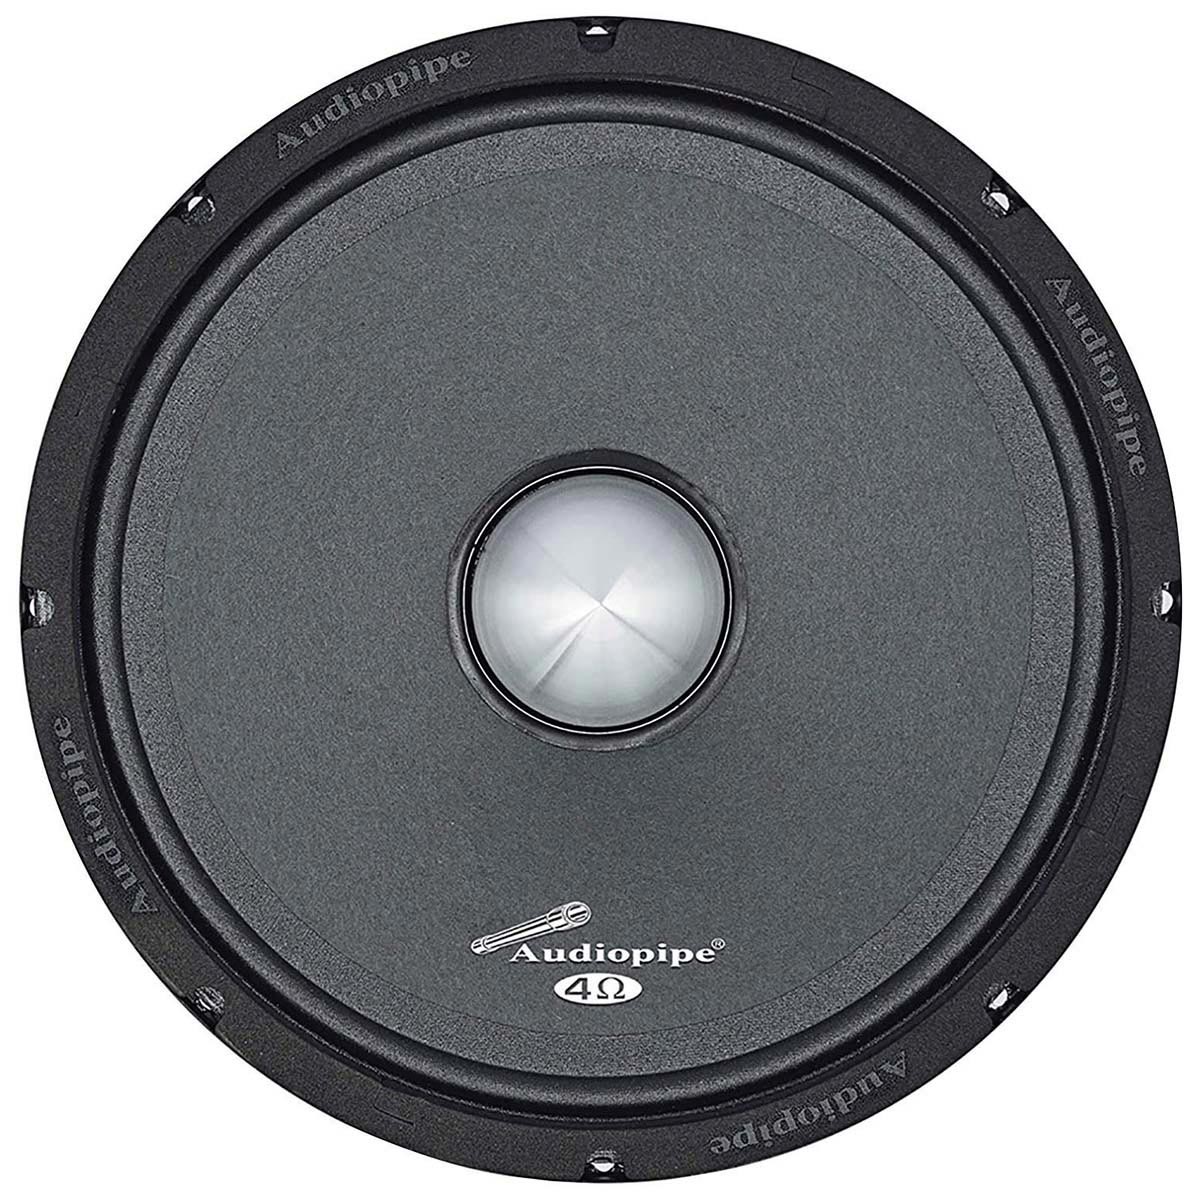 Audiopipe 10" Shallow Low Mid Frequency Speaker 600w Each